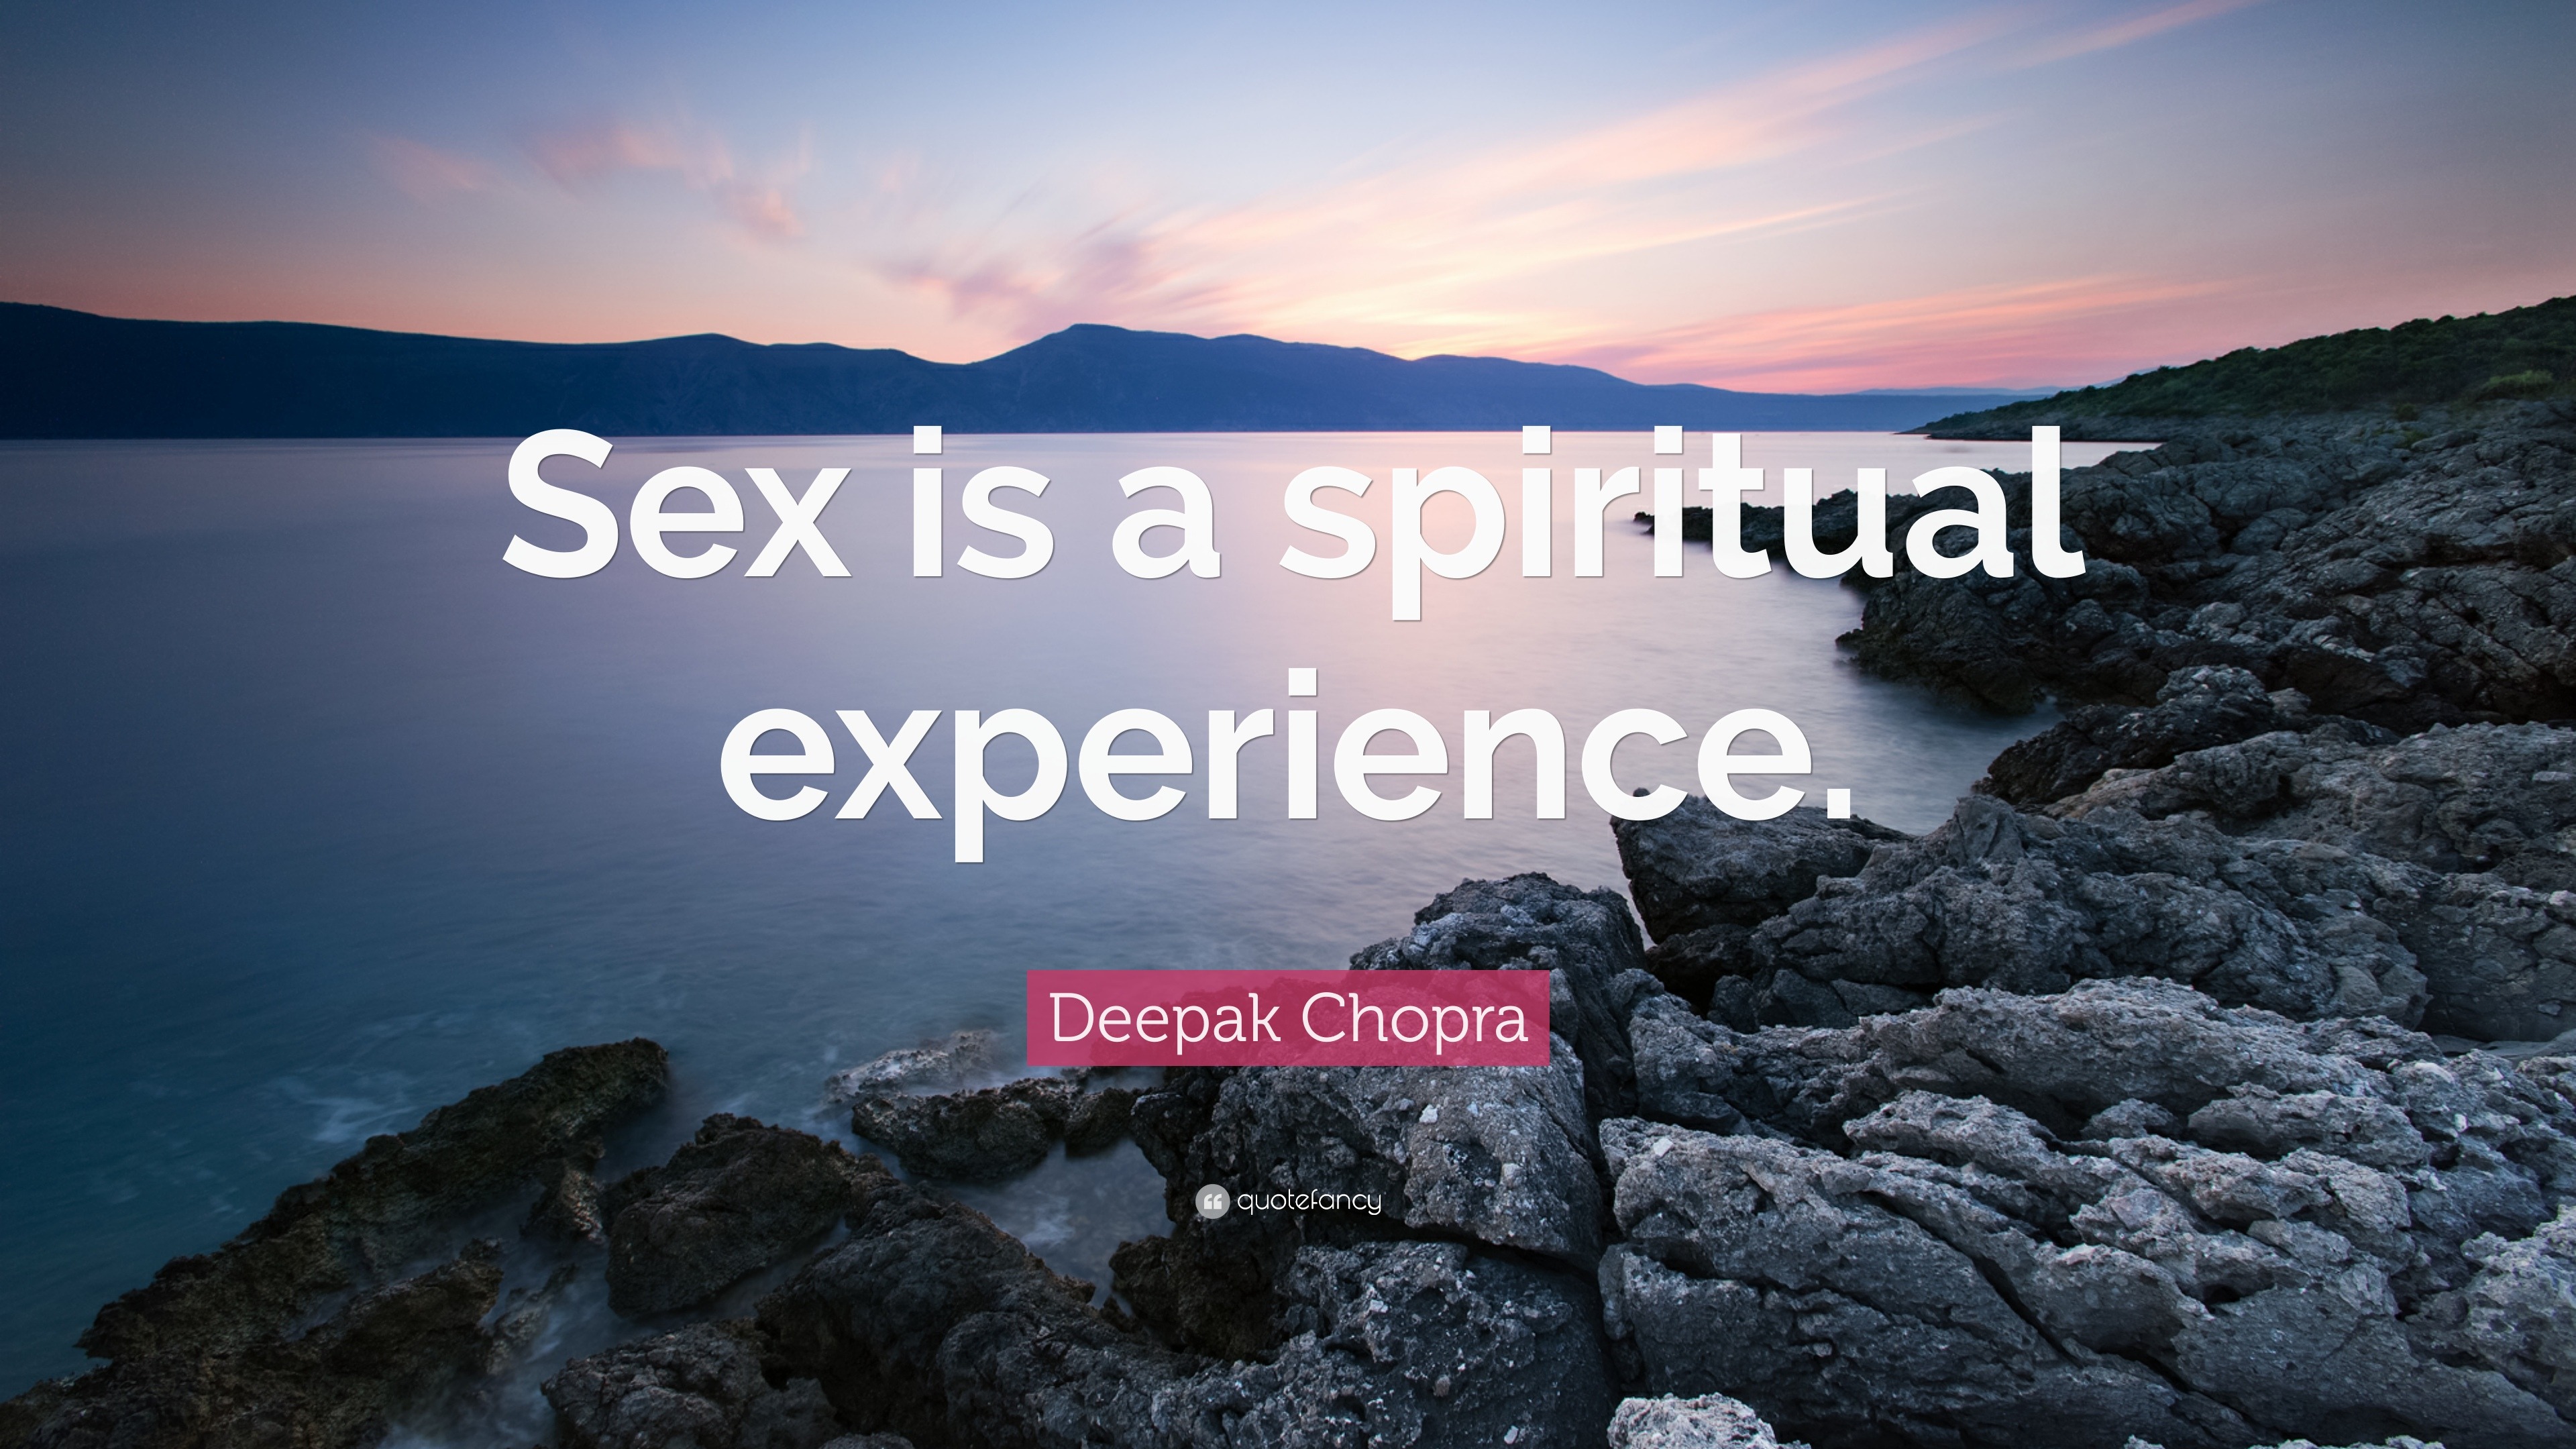 Sex is a spiritual experience